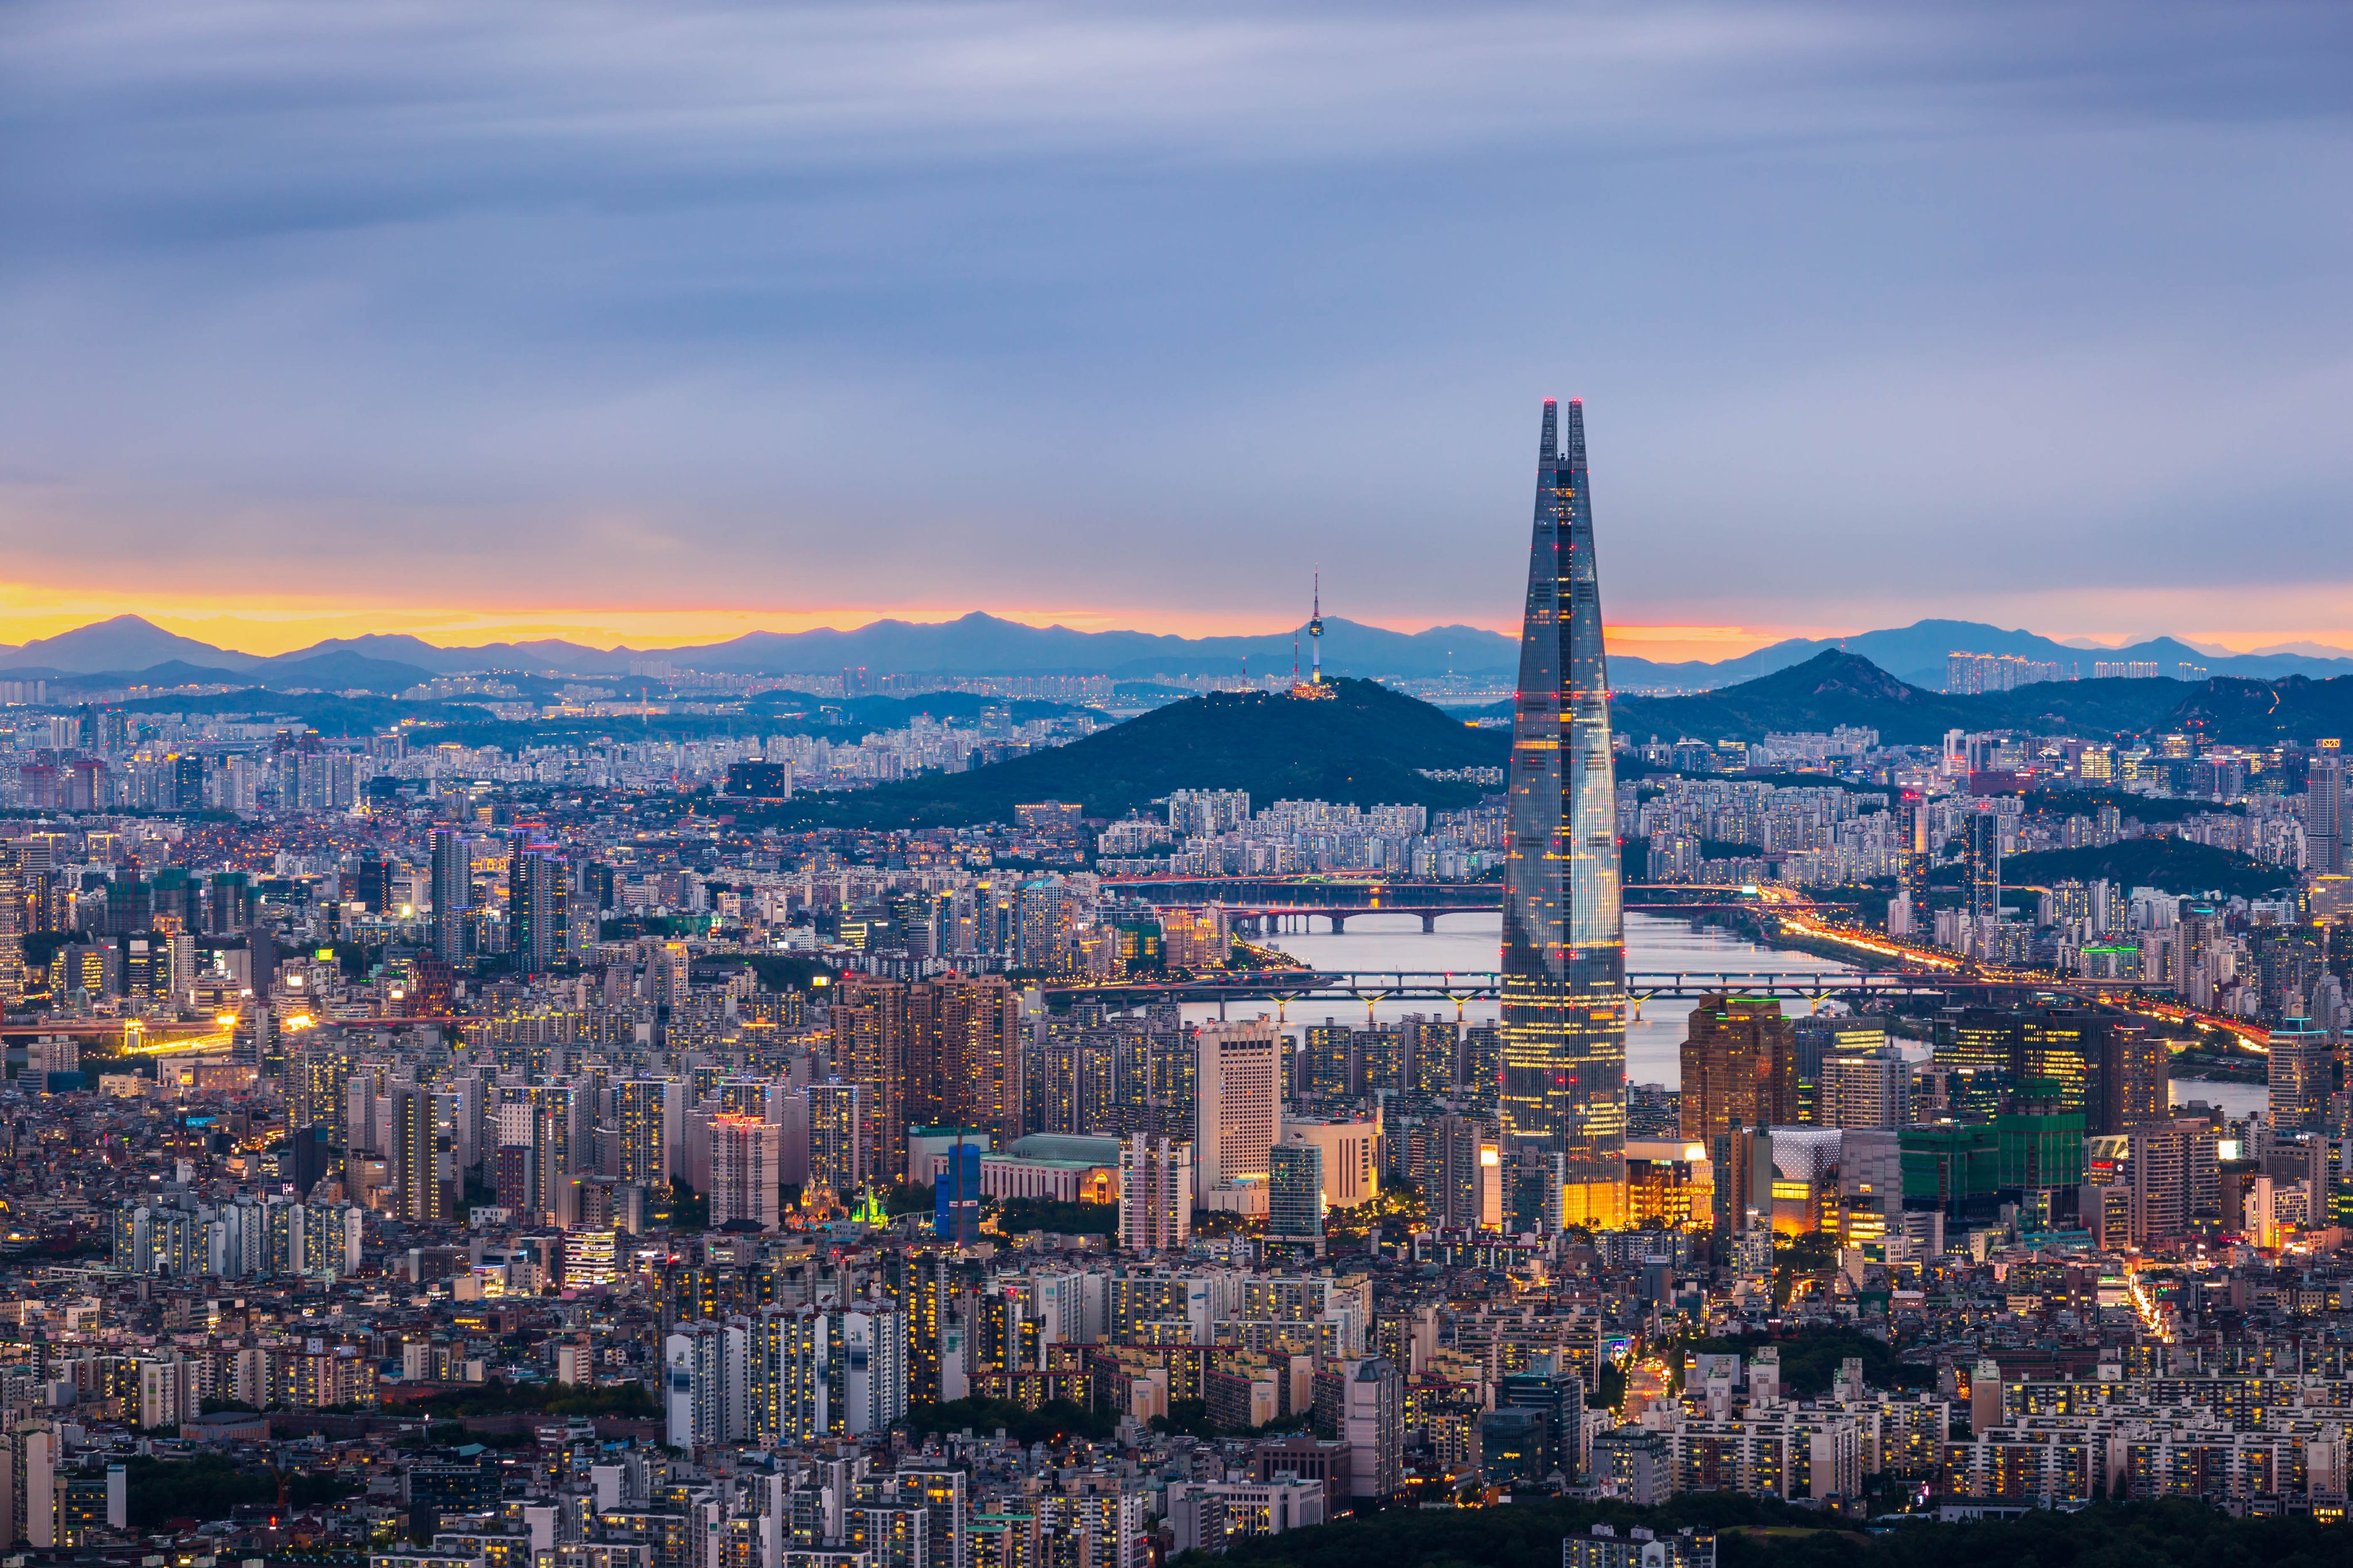 Seoul City skyline and downtown with a view of Namhansanseong mountain at sunset.